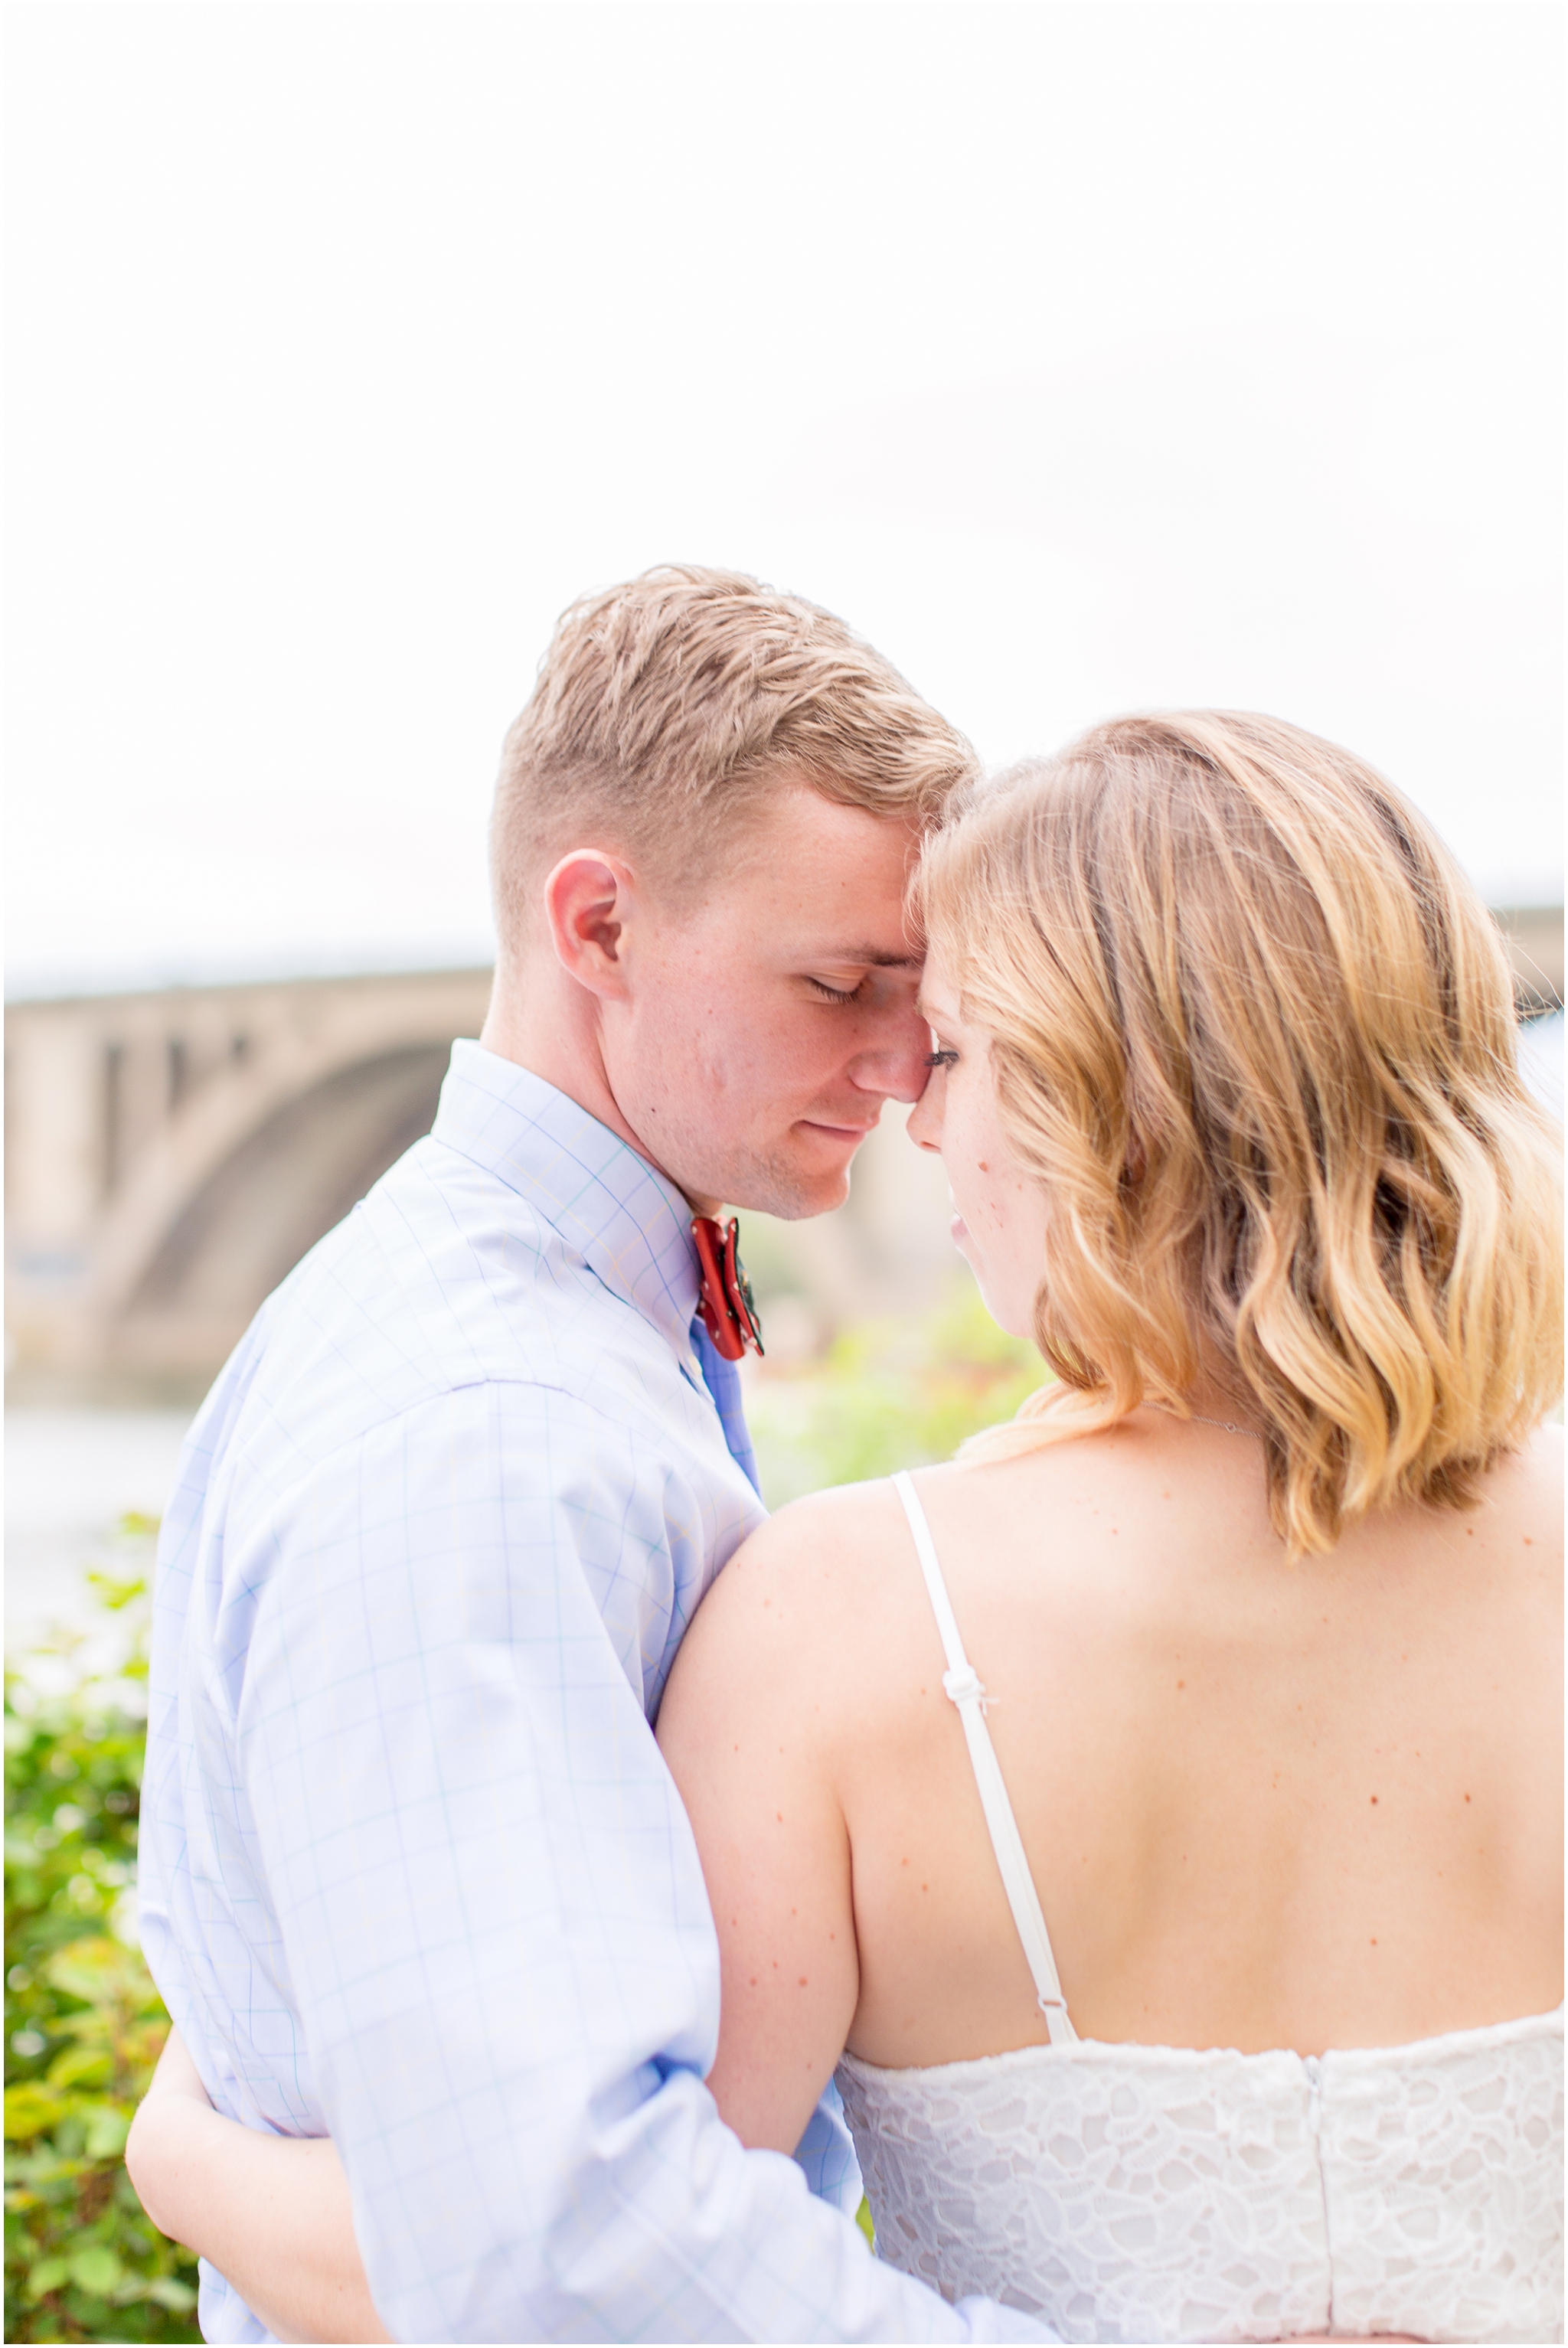 DC elopement photographer captured this Old Post Chapel wedding on Fort Meyer and along the Georgetown waterfront. This DC elopement included cherry blossom wedding photos and Georgetown wedding portraits. This wedding includes creative ideas for something blue and something borrowed!